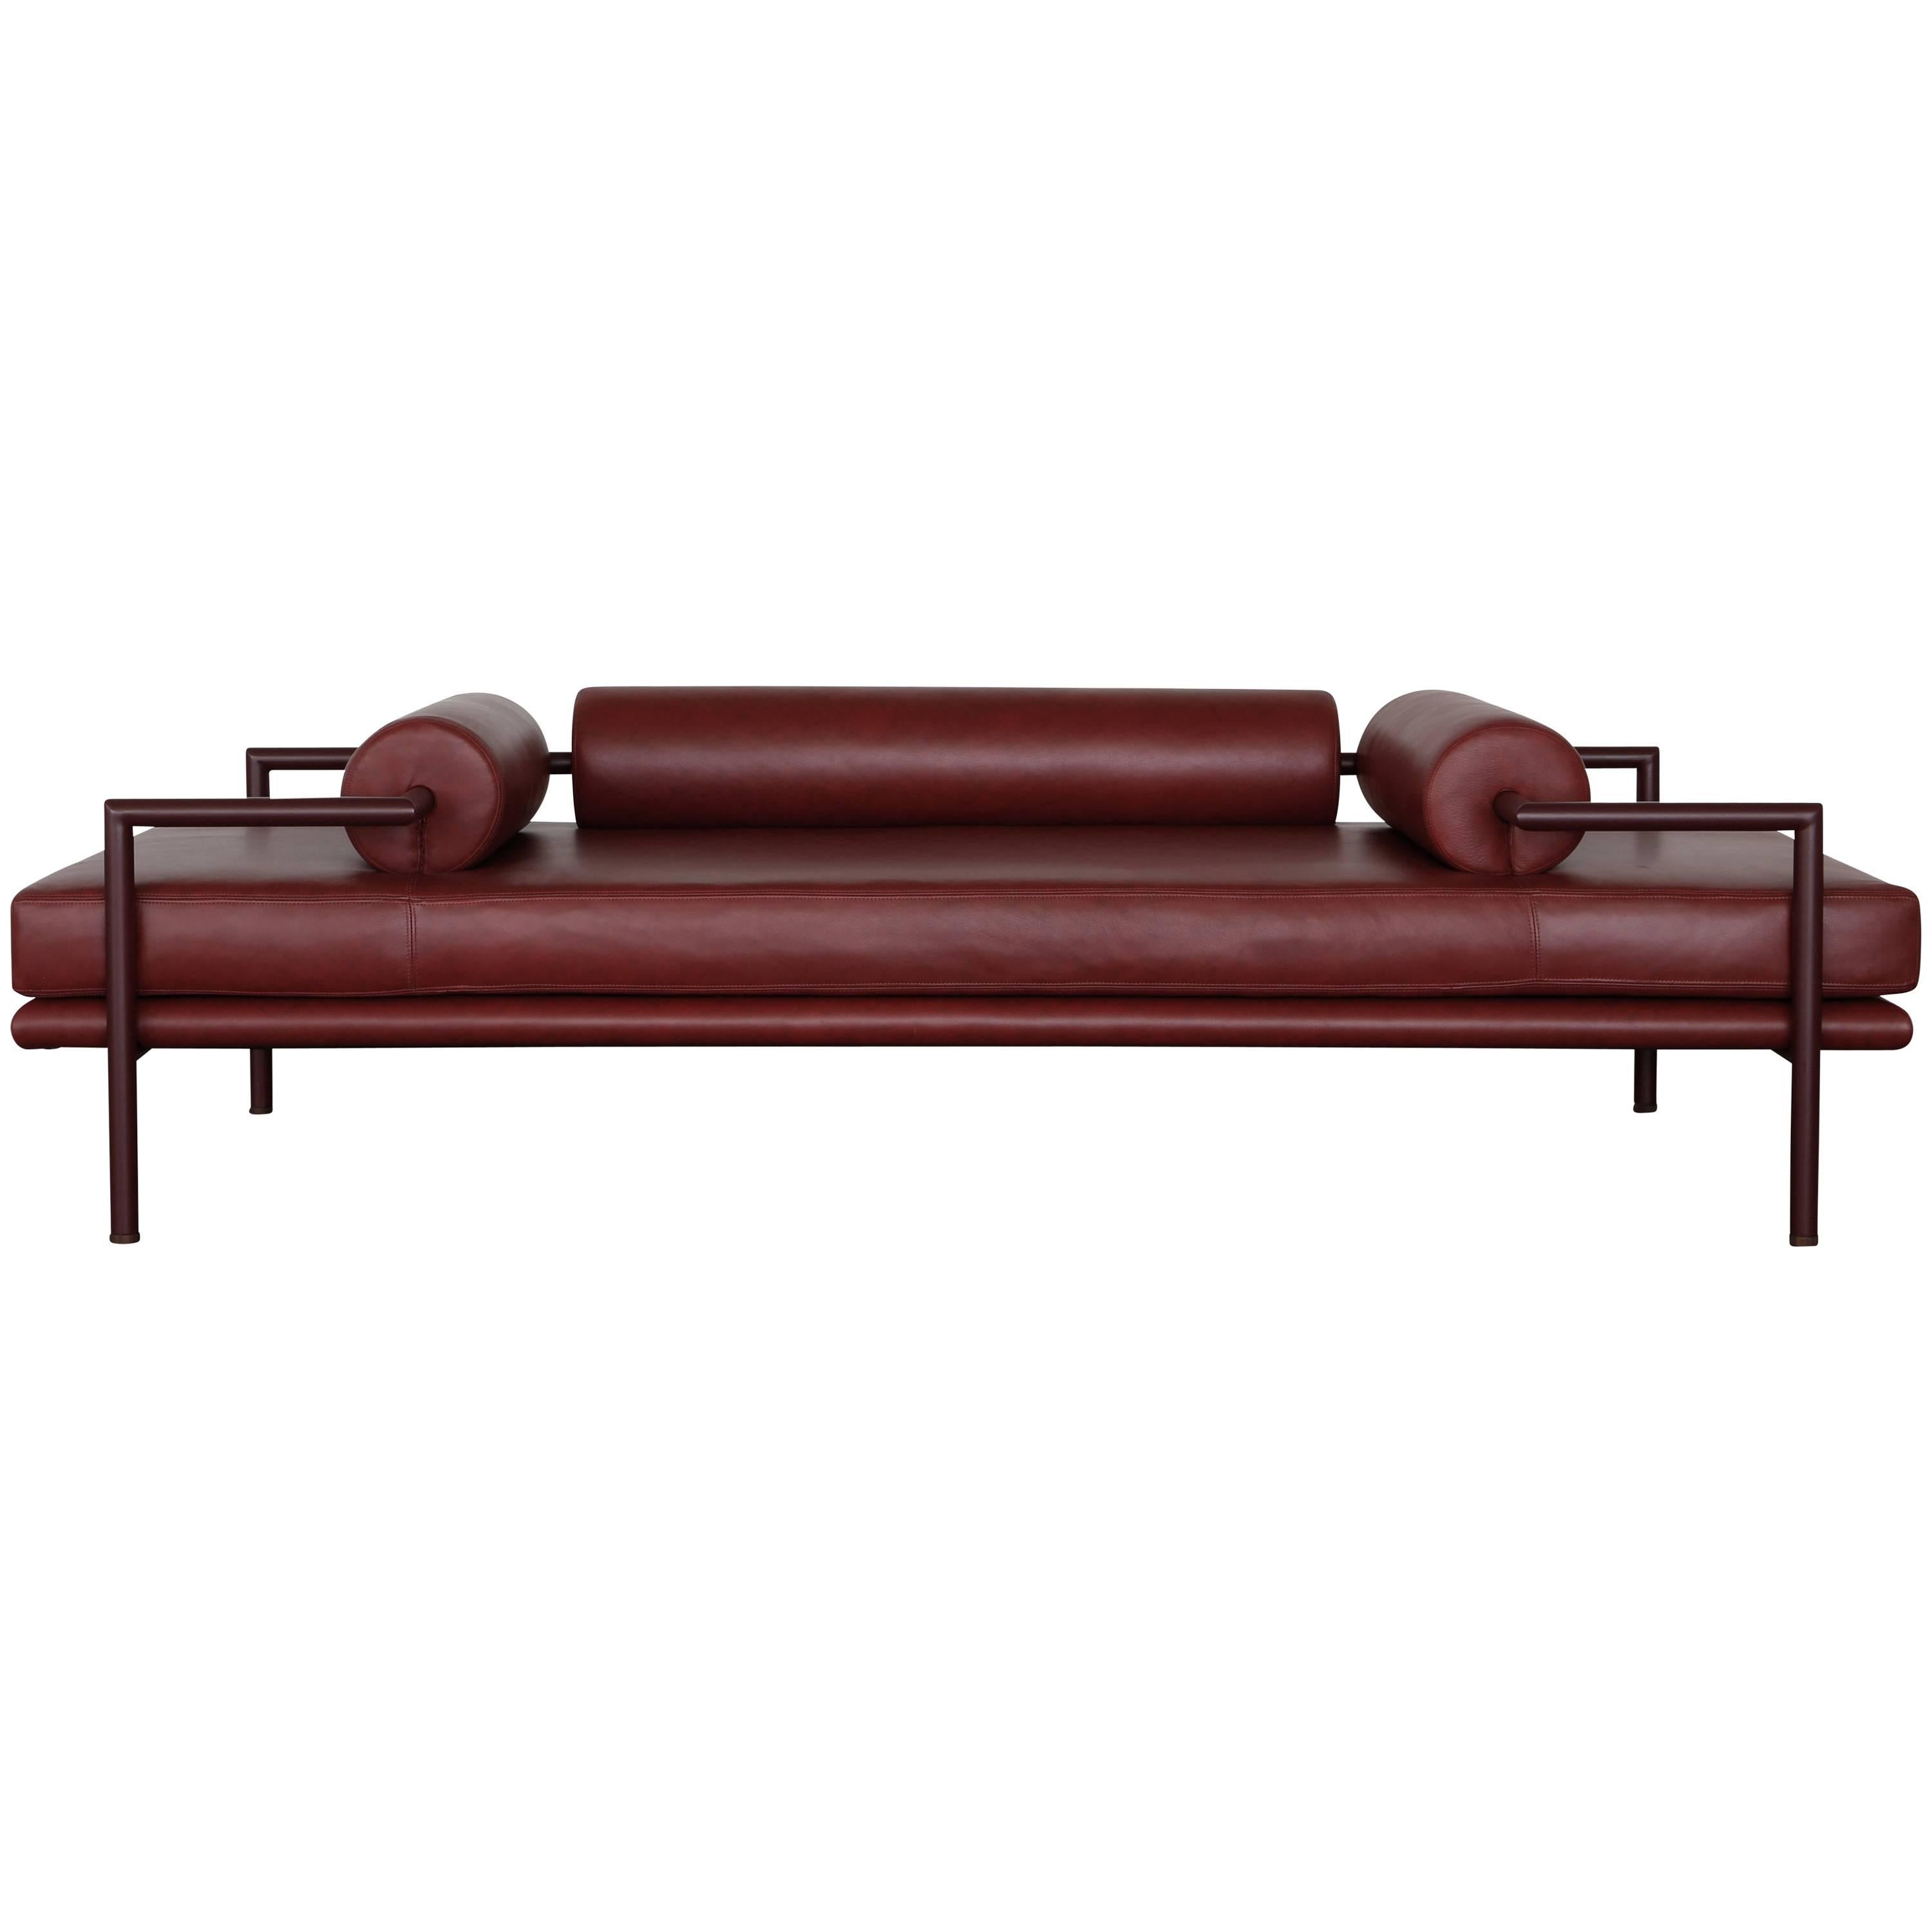 Modern Dorcia Daybed in Monochrome Burgundy Leather and Steel Frame by Luteca